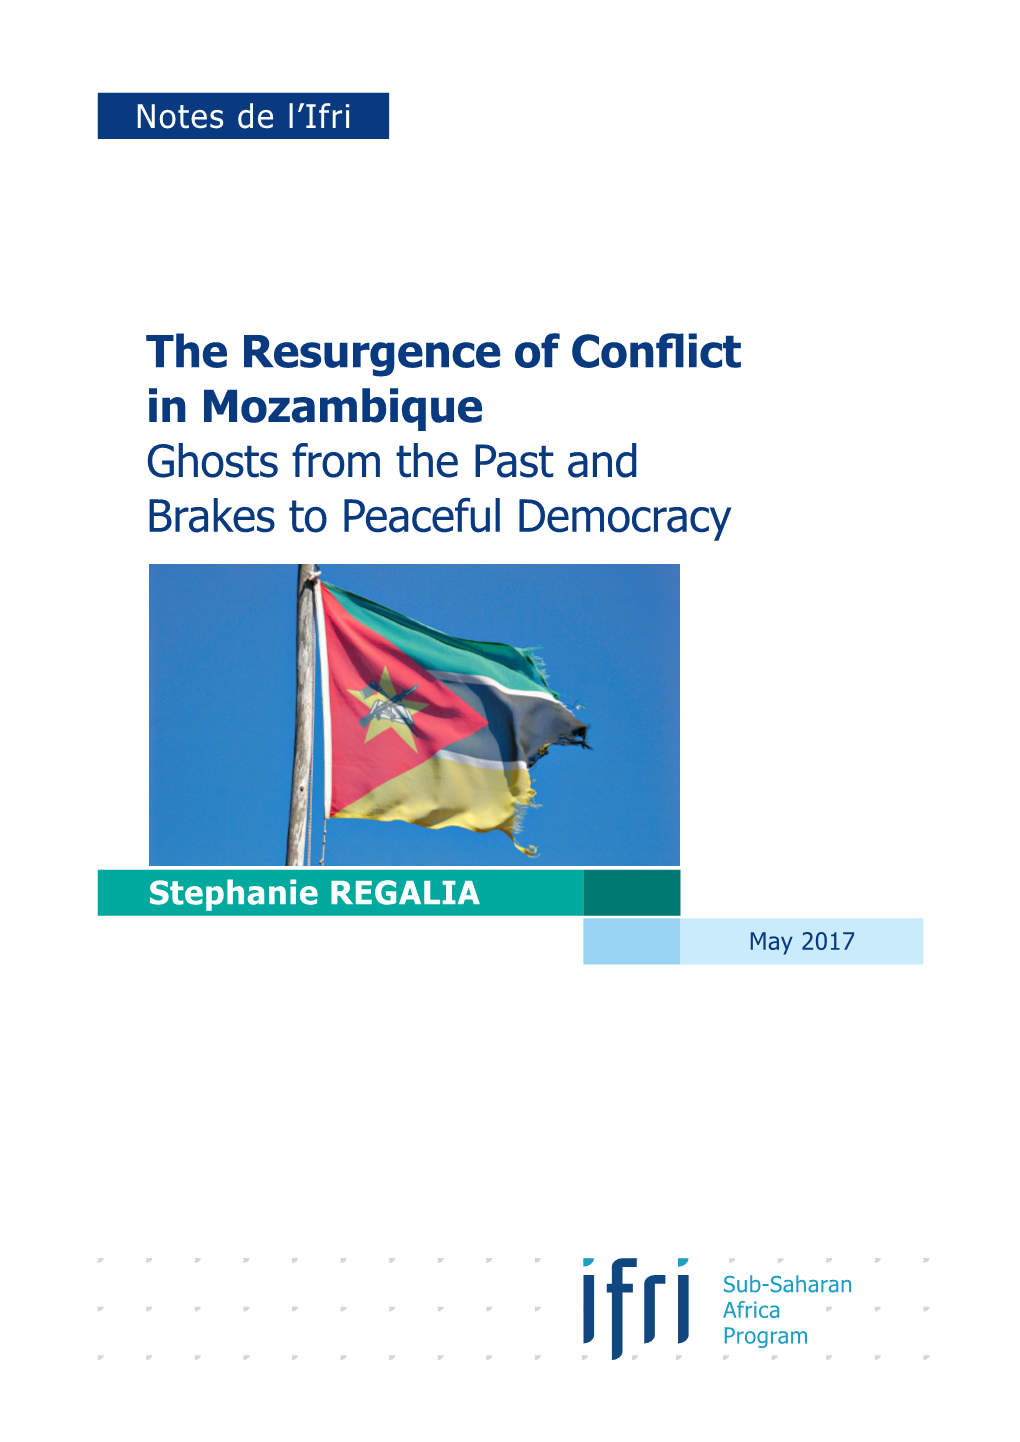 The Resurgence of Conflict in Mozambique Ghosts from the Past and Brakes to Peaceful Democracy